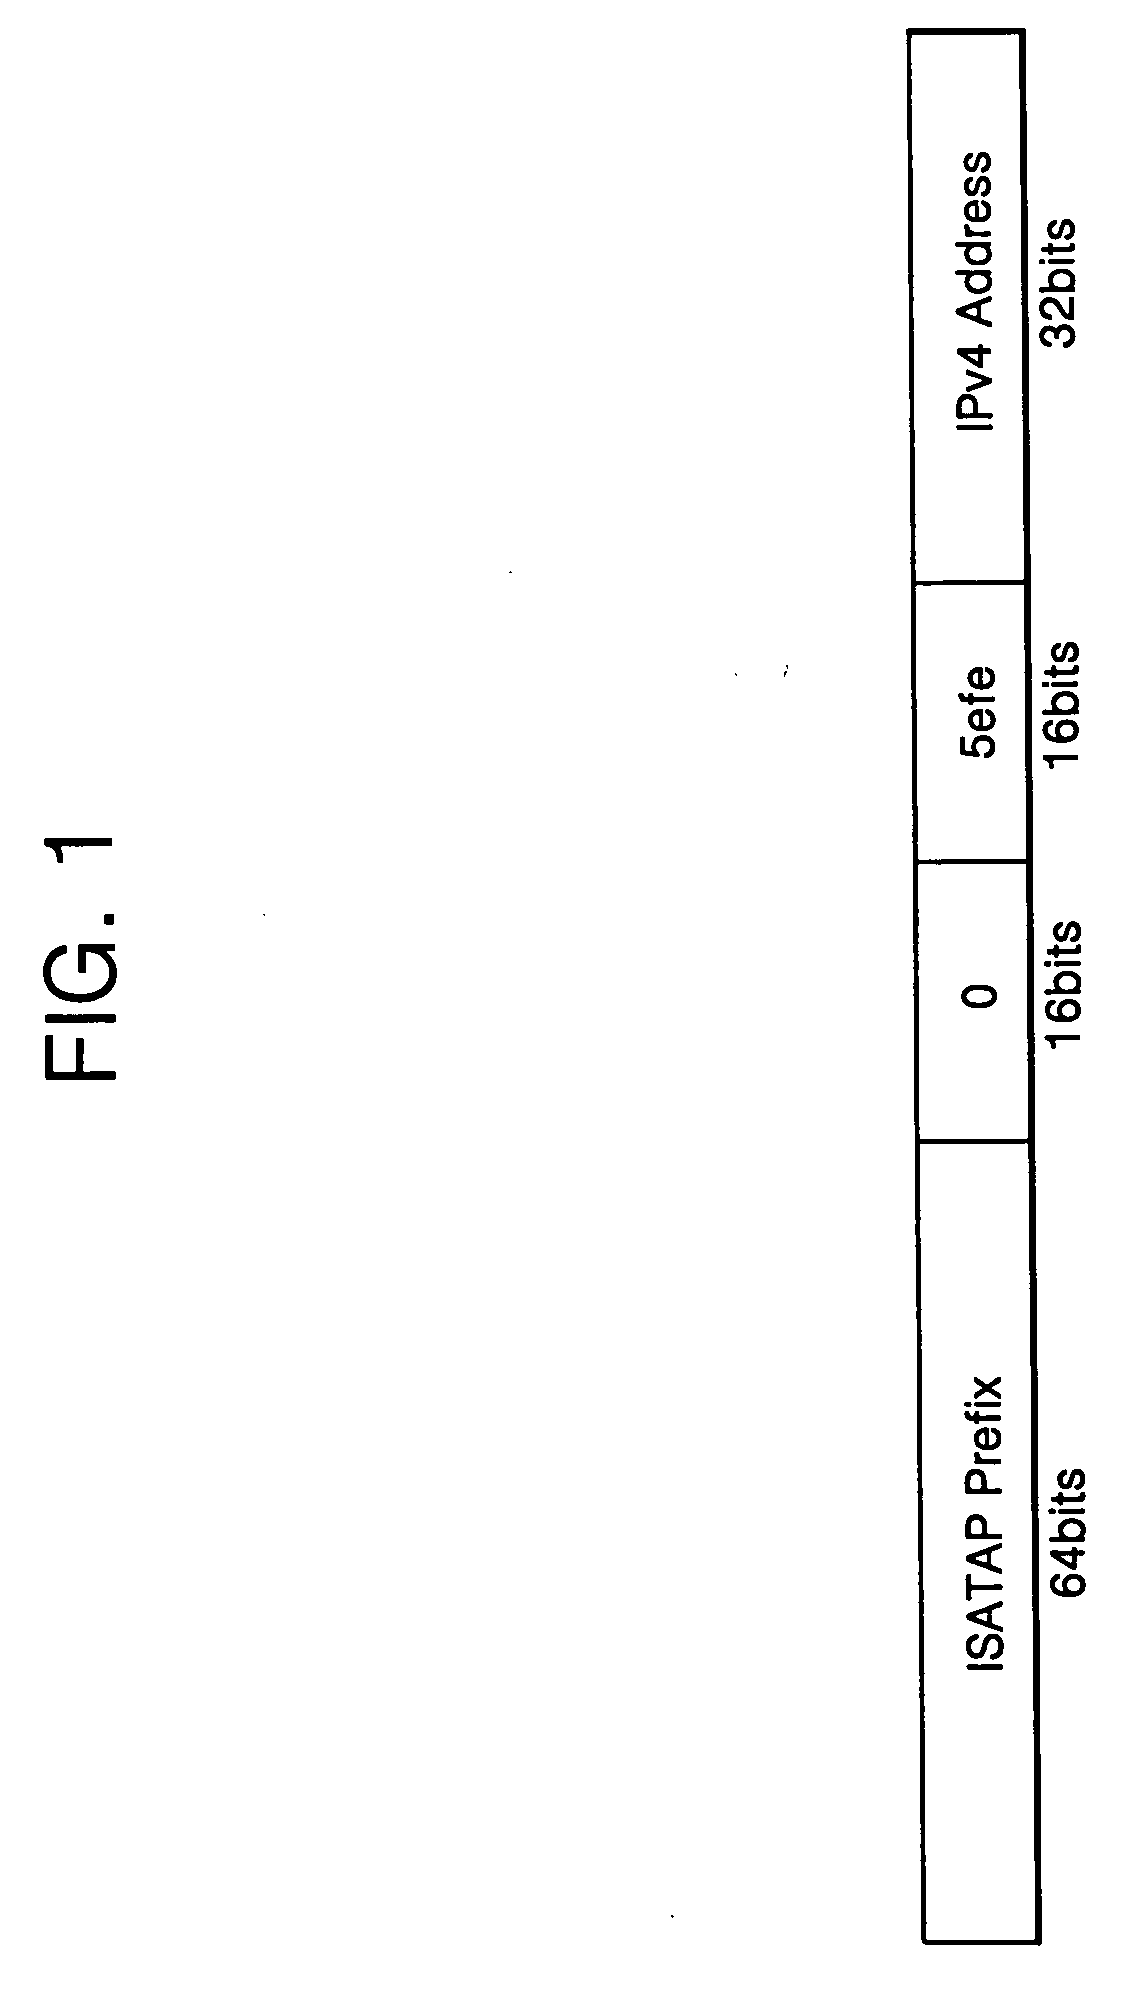 ISATAP tunneling system and method between IPv4 network and IPv6 network